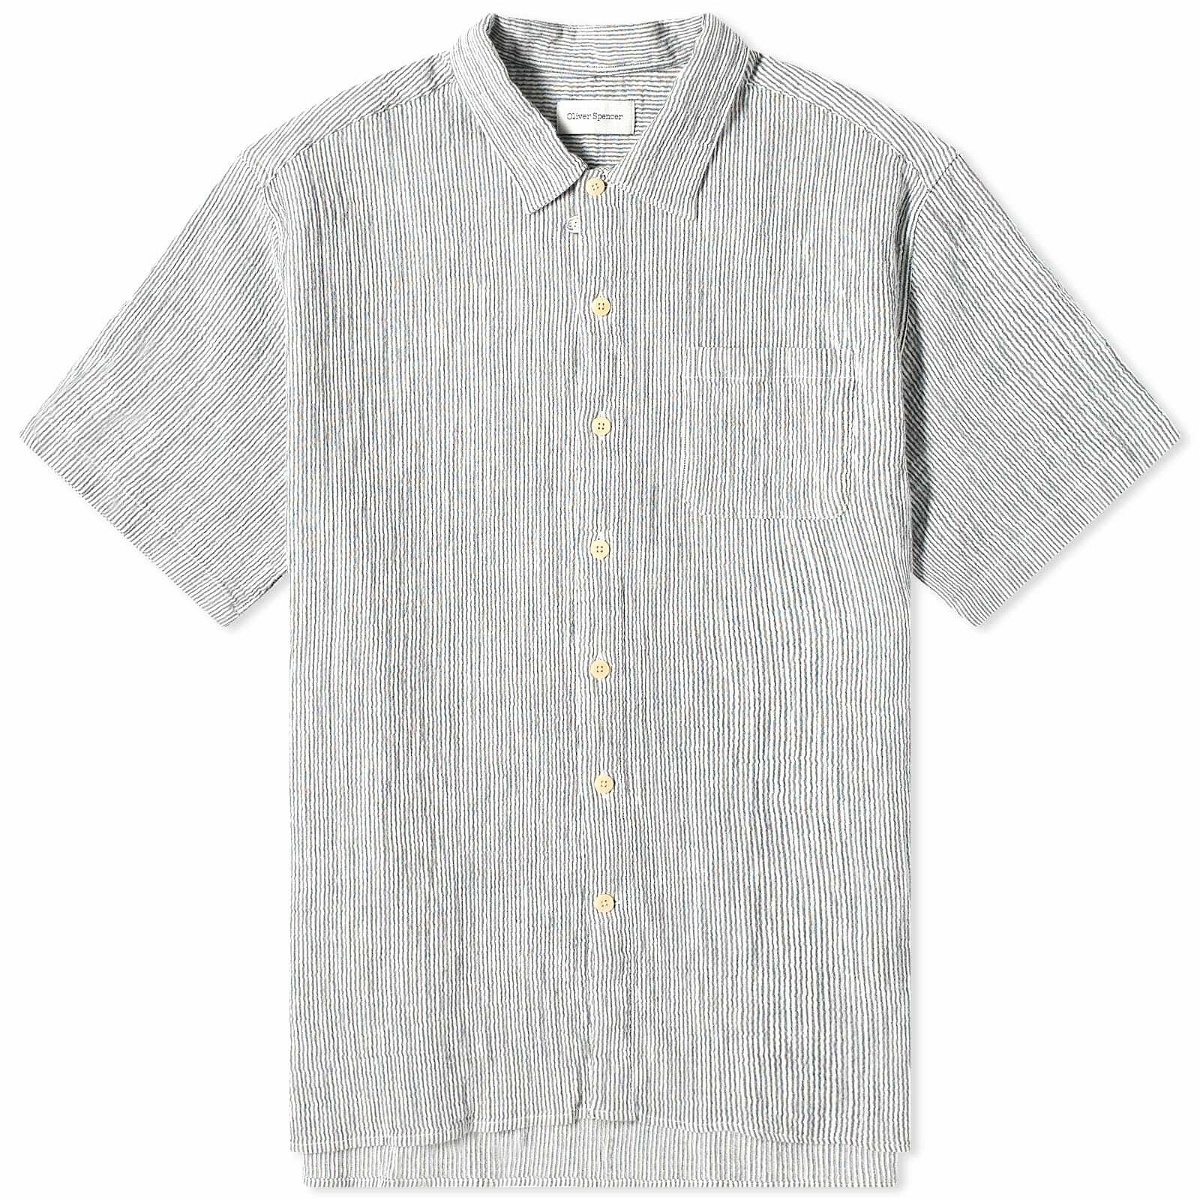 Photo: Oliver Spencer Men's Riviera Vacation Shirt in Navy/White